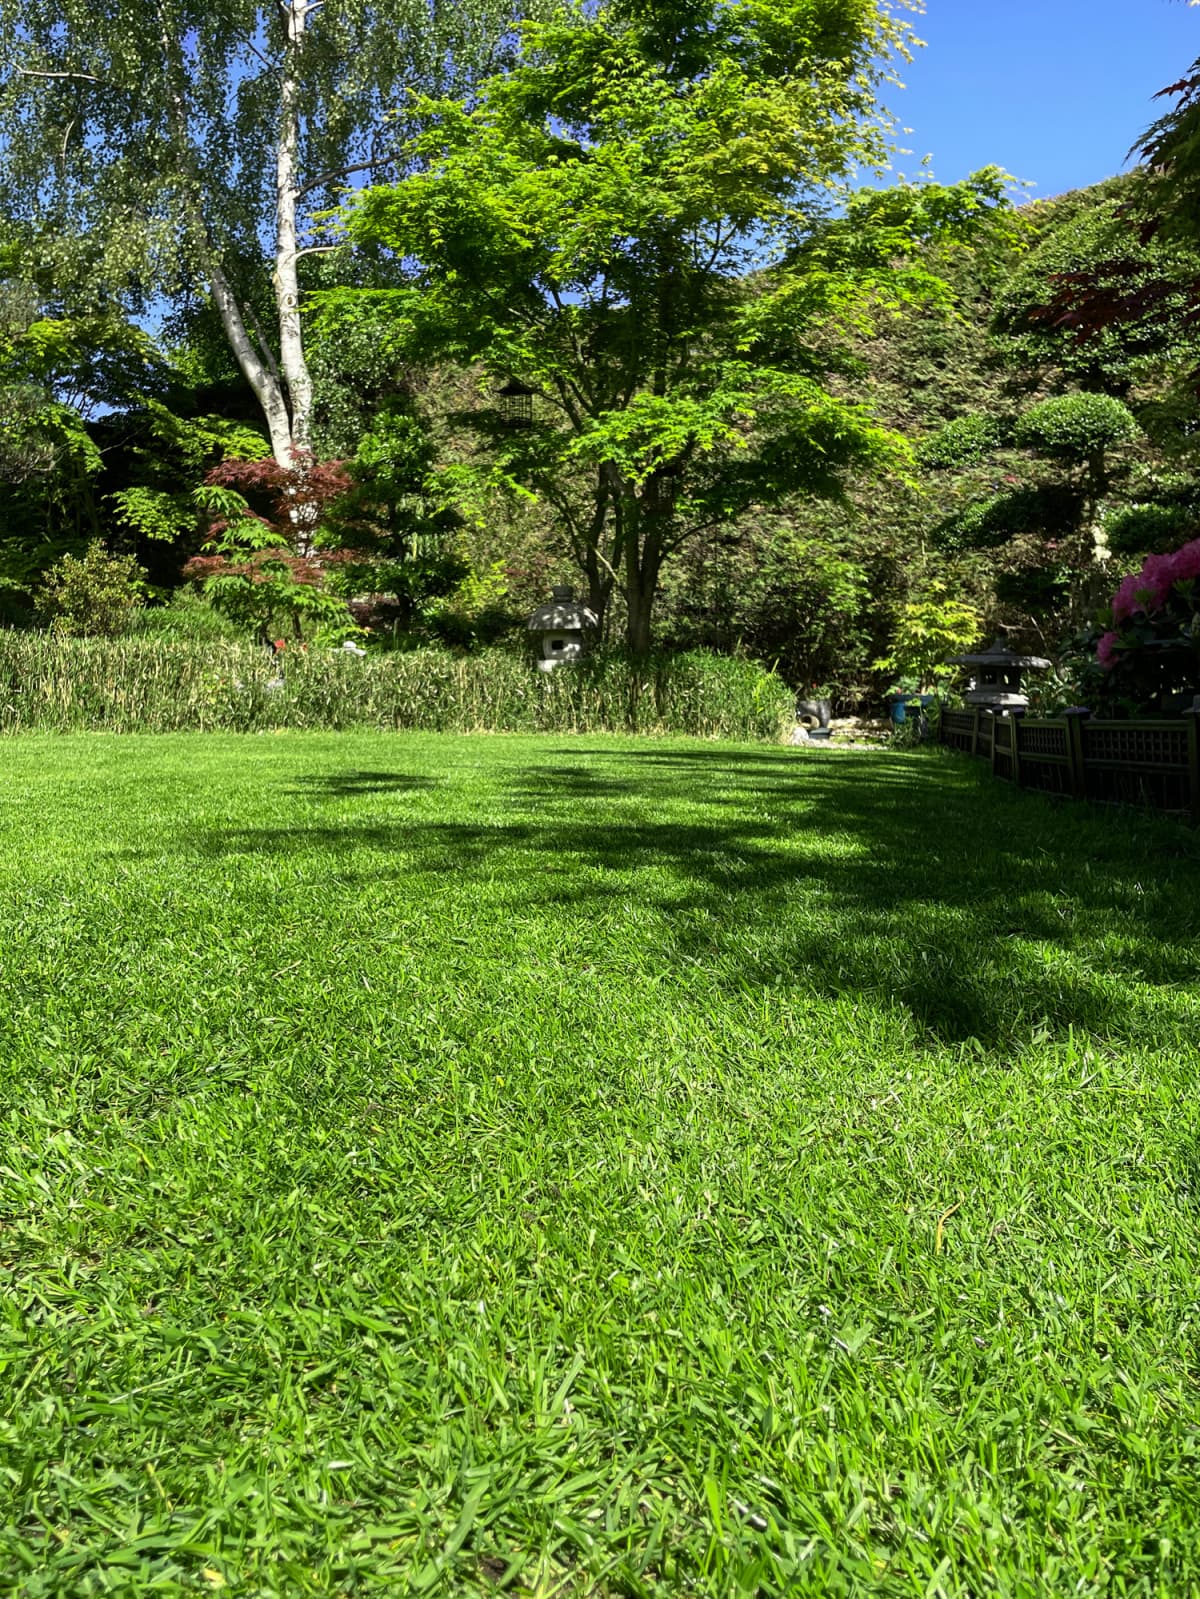 A lawn and trees on a sunny day.